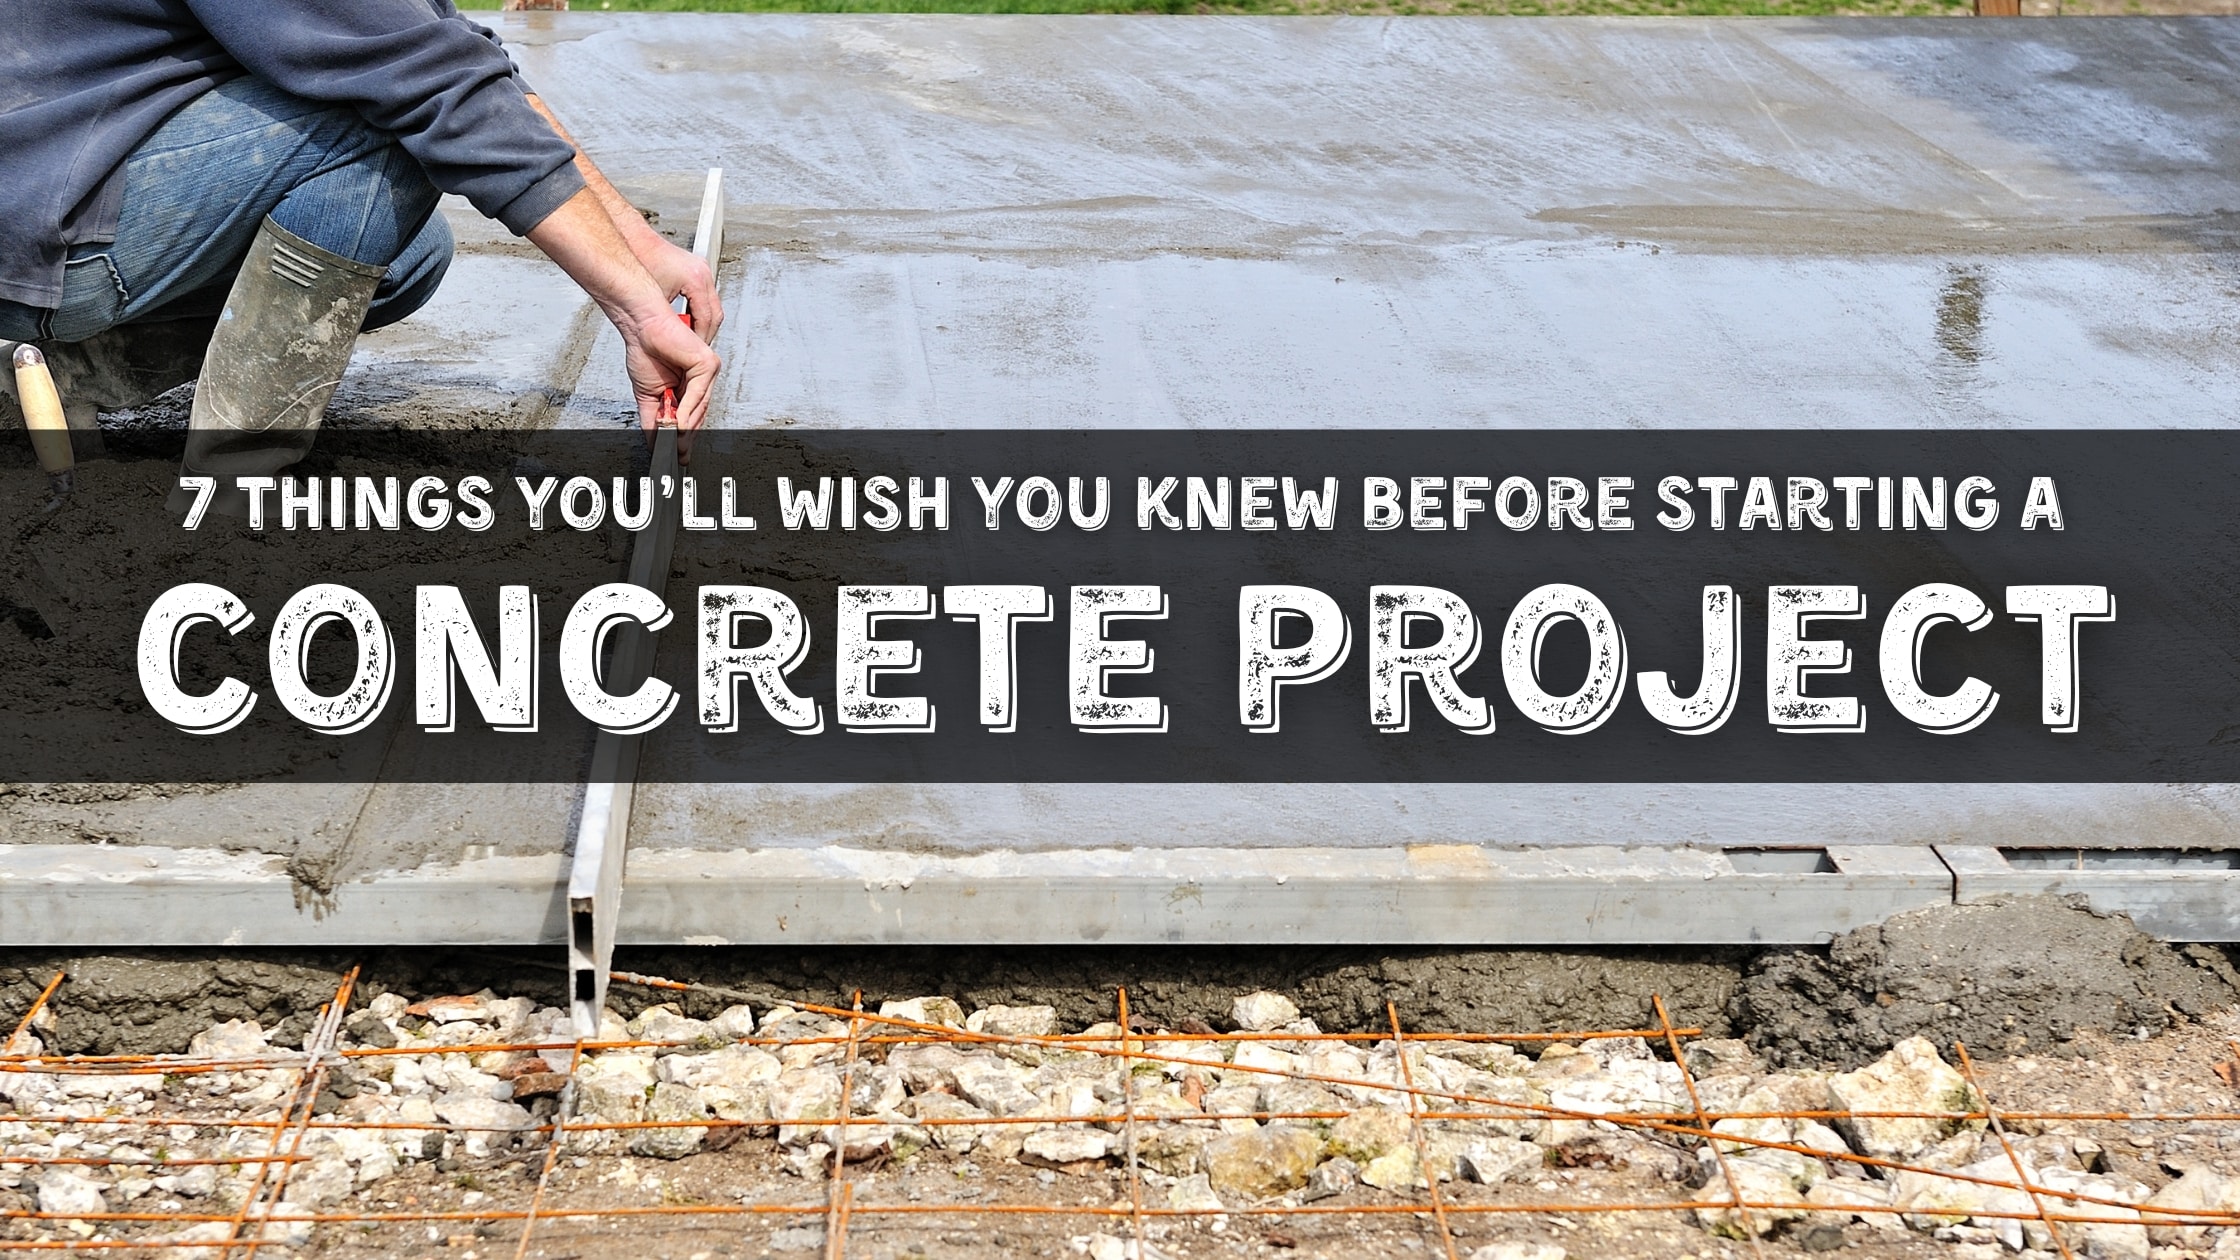 7 things you'll wish you knew before starting a concrete project